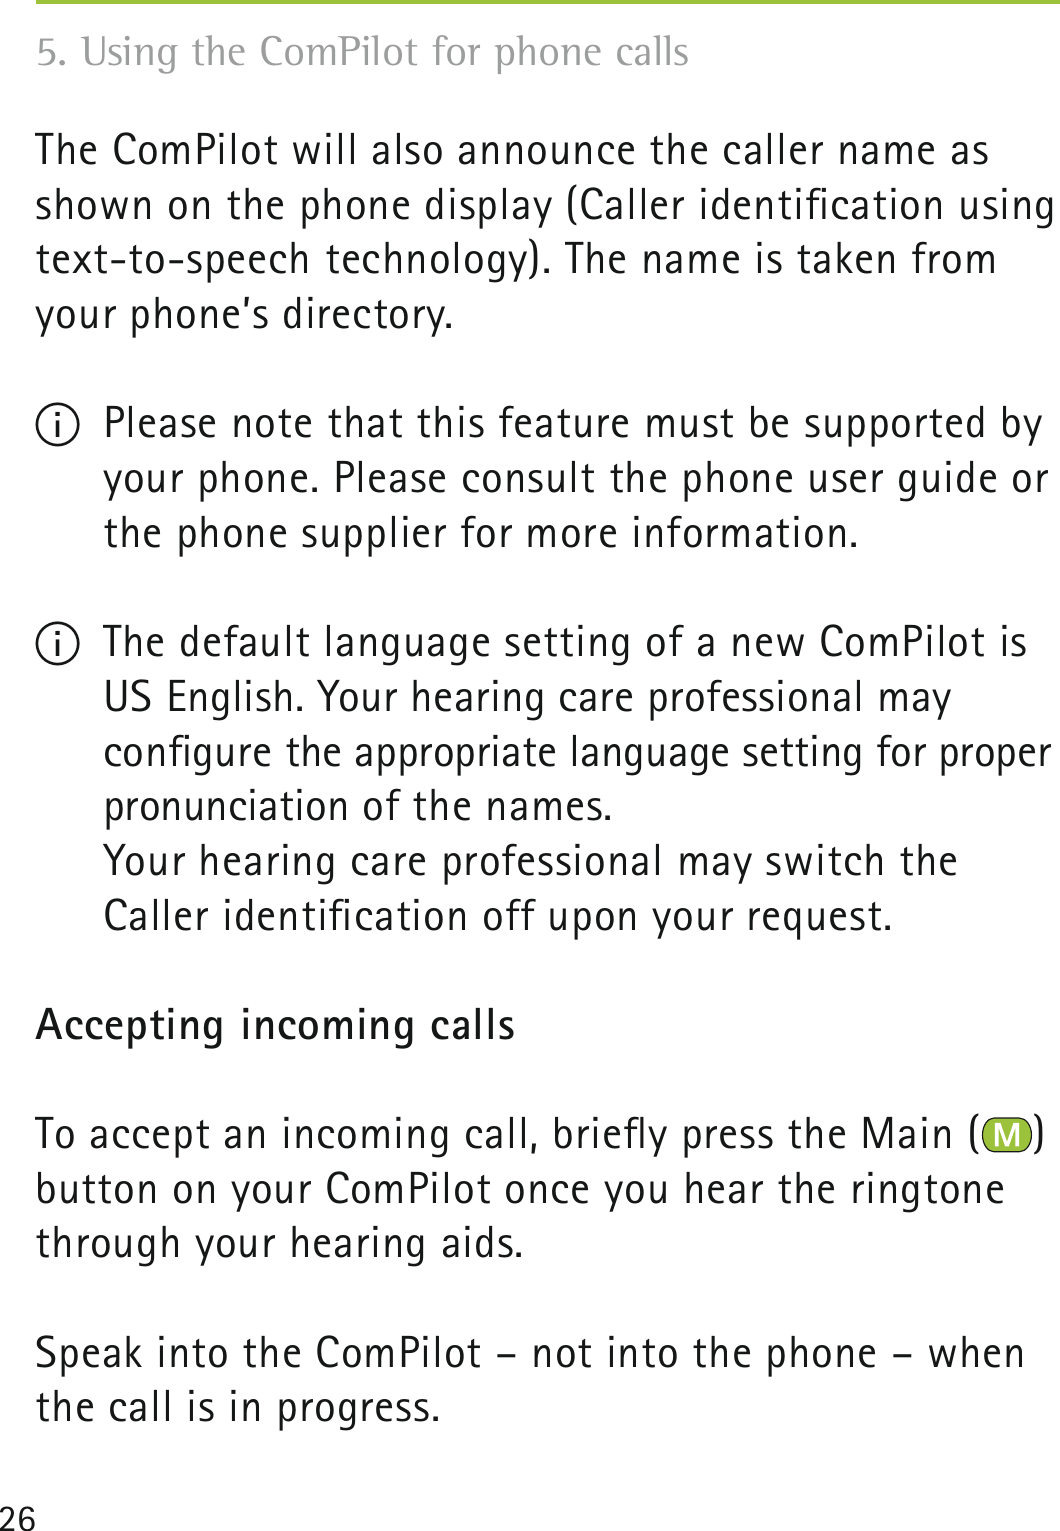 26The ComPilot will also announce the caller name as shown on the phone display (Caller identiﬁcation using text-to-speech technology). The name is taken from your phone’s directory. I  Please note that this feature must be supported by your phone. Please consult the phone user guide or the phone supplier for more information.I  The default language setting of a new ComPilot is US English. Your hearing care professional may  conﬁgure the appropriate language setting for proper pronunciation of the names.   Your hearing care professional may switch the  Caller identiﬁcation off upon your request. Accepting incoming callsTo accept an incoming call, brieﬂy press the Main ( ) button on your ComPilot once you hear the ringtone through your hearing aids.Speak into the ComPilot – not into the phone – when the call is in progress.5. Using the ComPilot for phone calls 